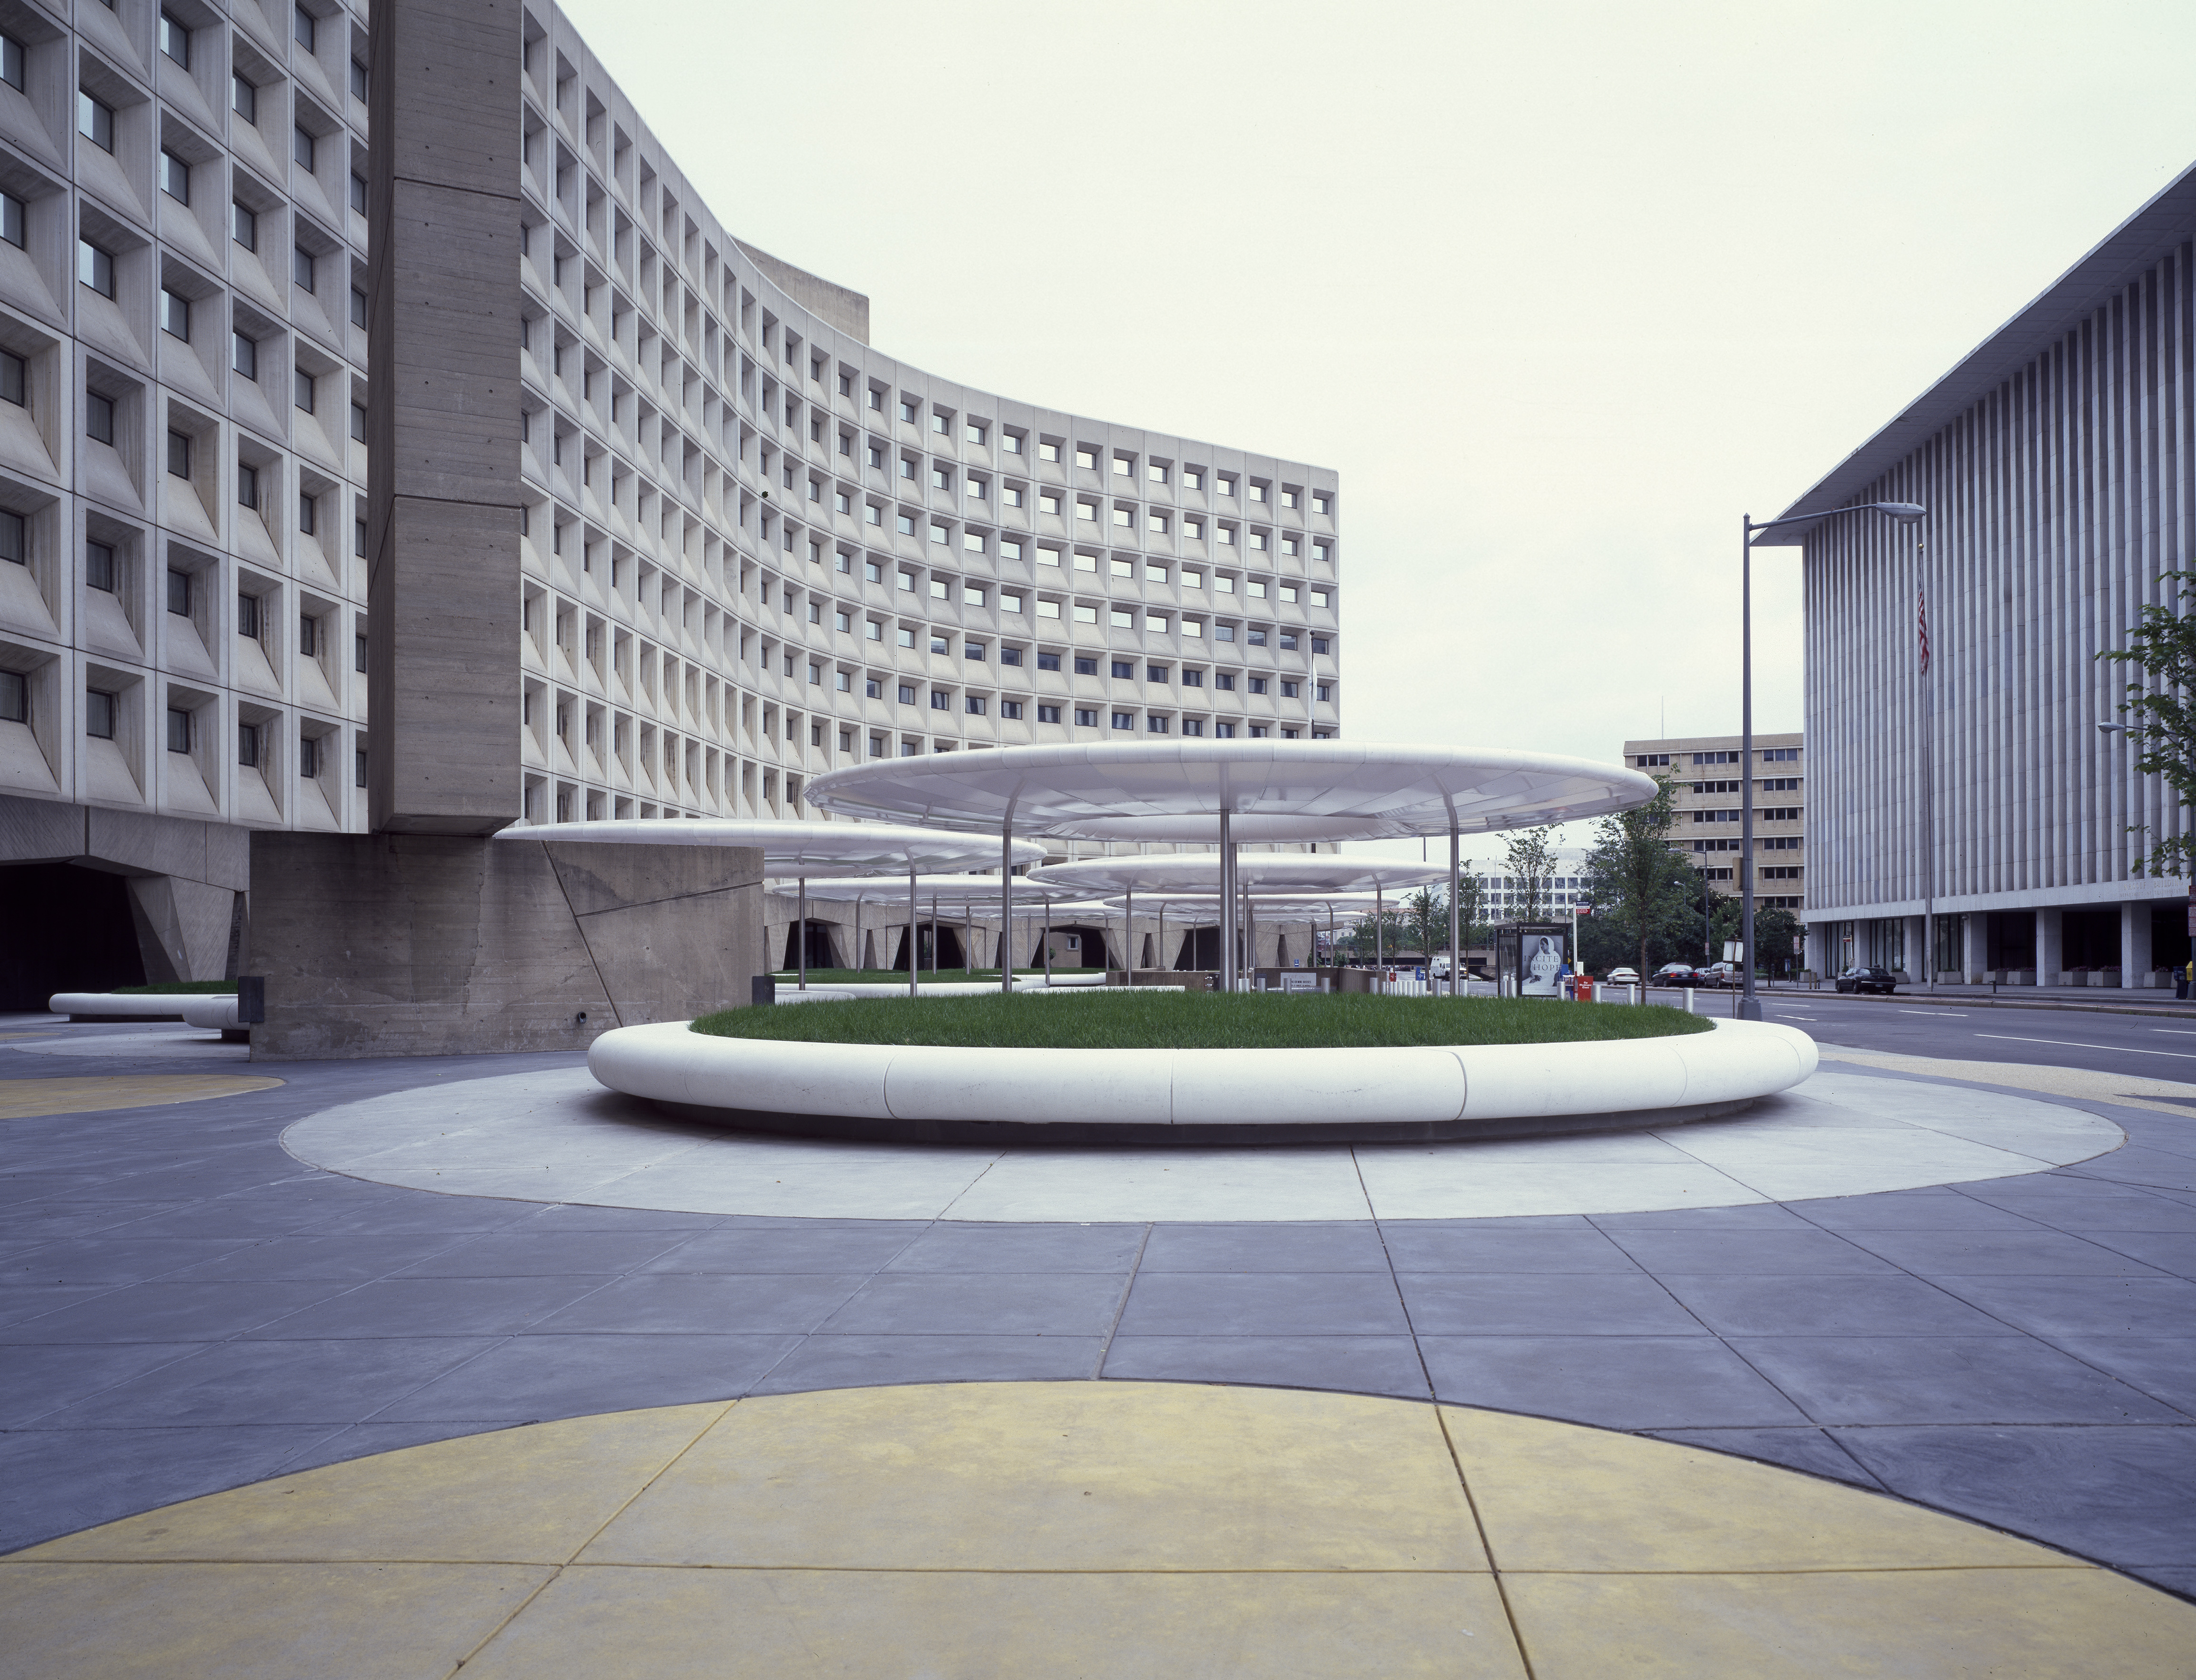 The headquarters of the Department of Housing and Urban Development, a brutalist building with circular canopies in its plaza.